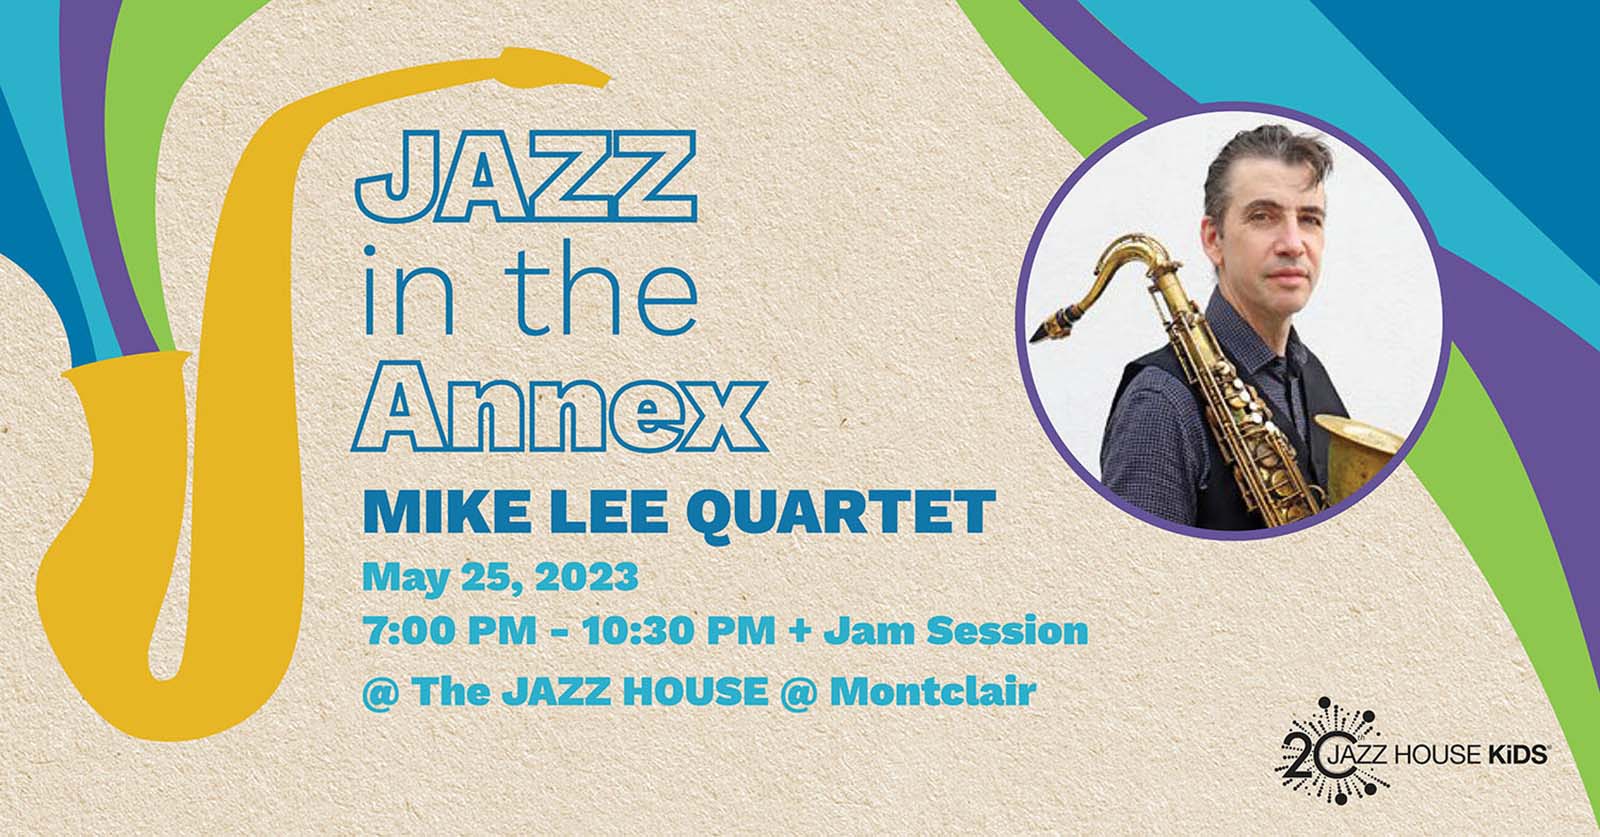 Jazz in the Annex featuring Mike Lee